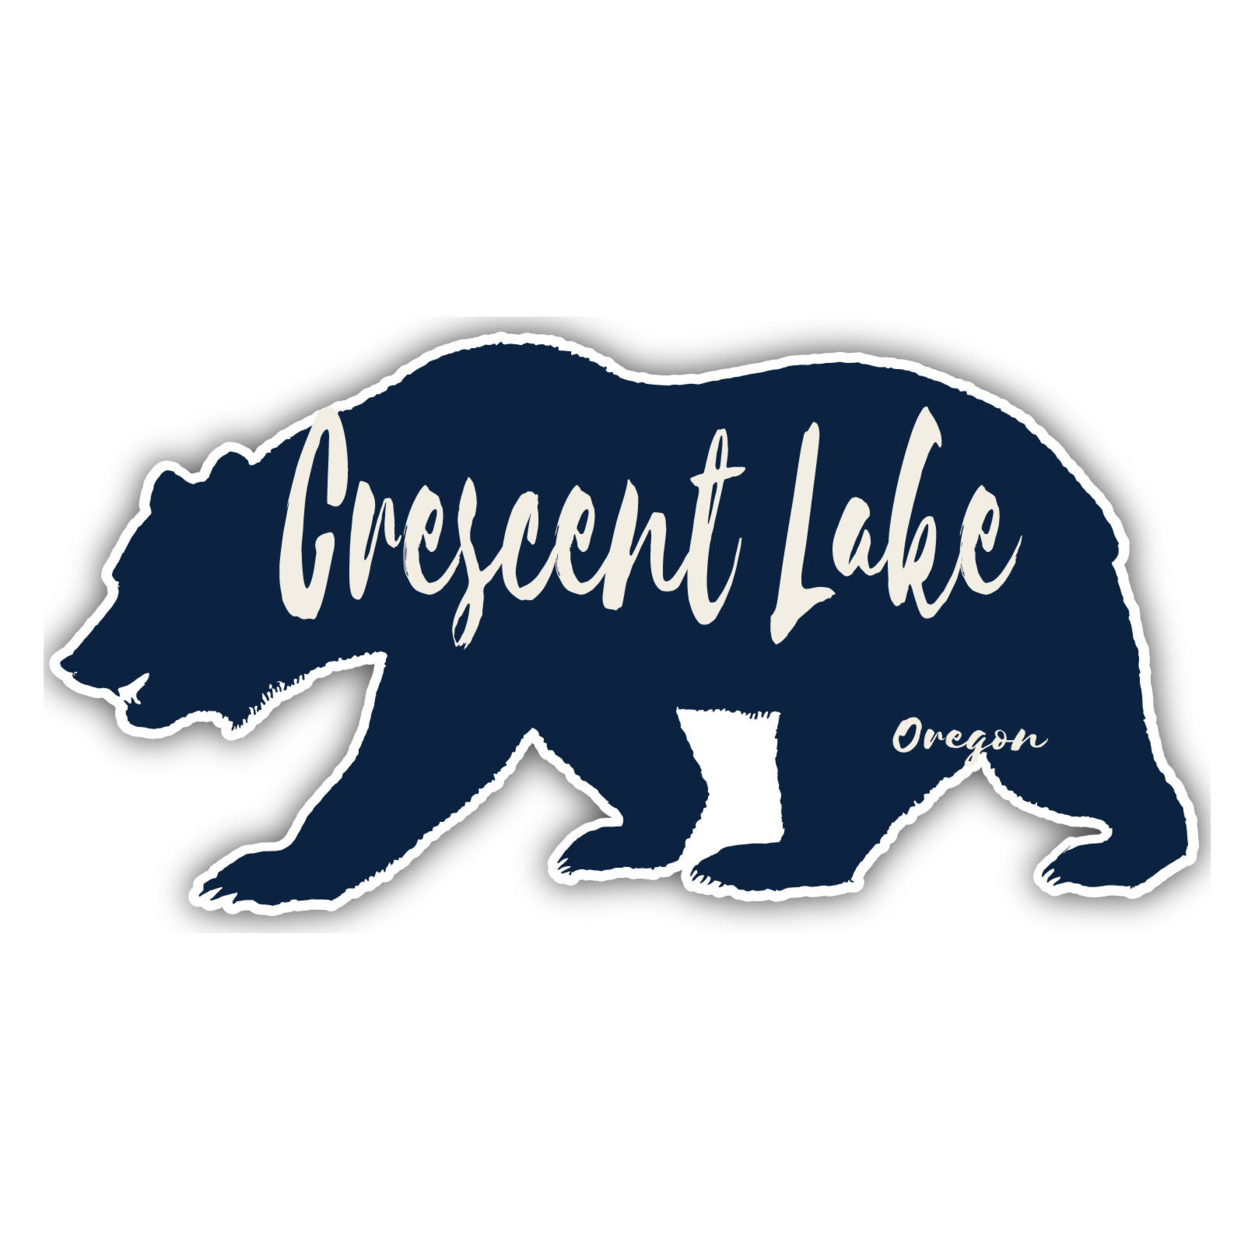 Crescent Lake Oregon Souvenir Decorative Stickers (Choose Theme And Size) - 4-Pack, 6-Inch, Camp Life